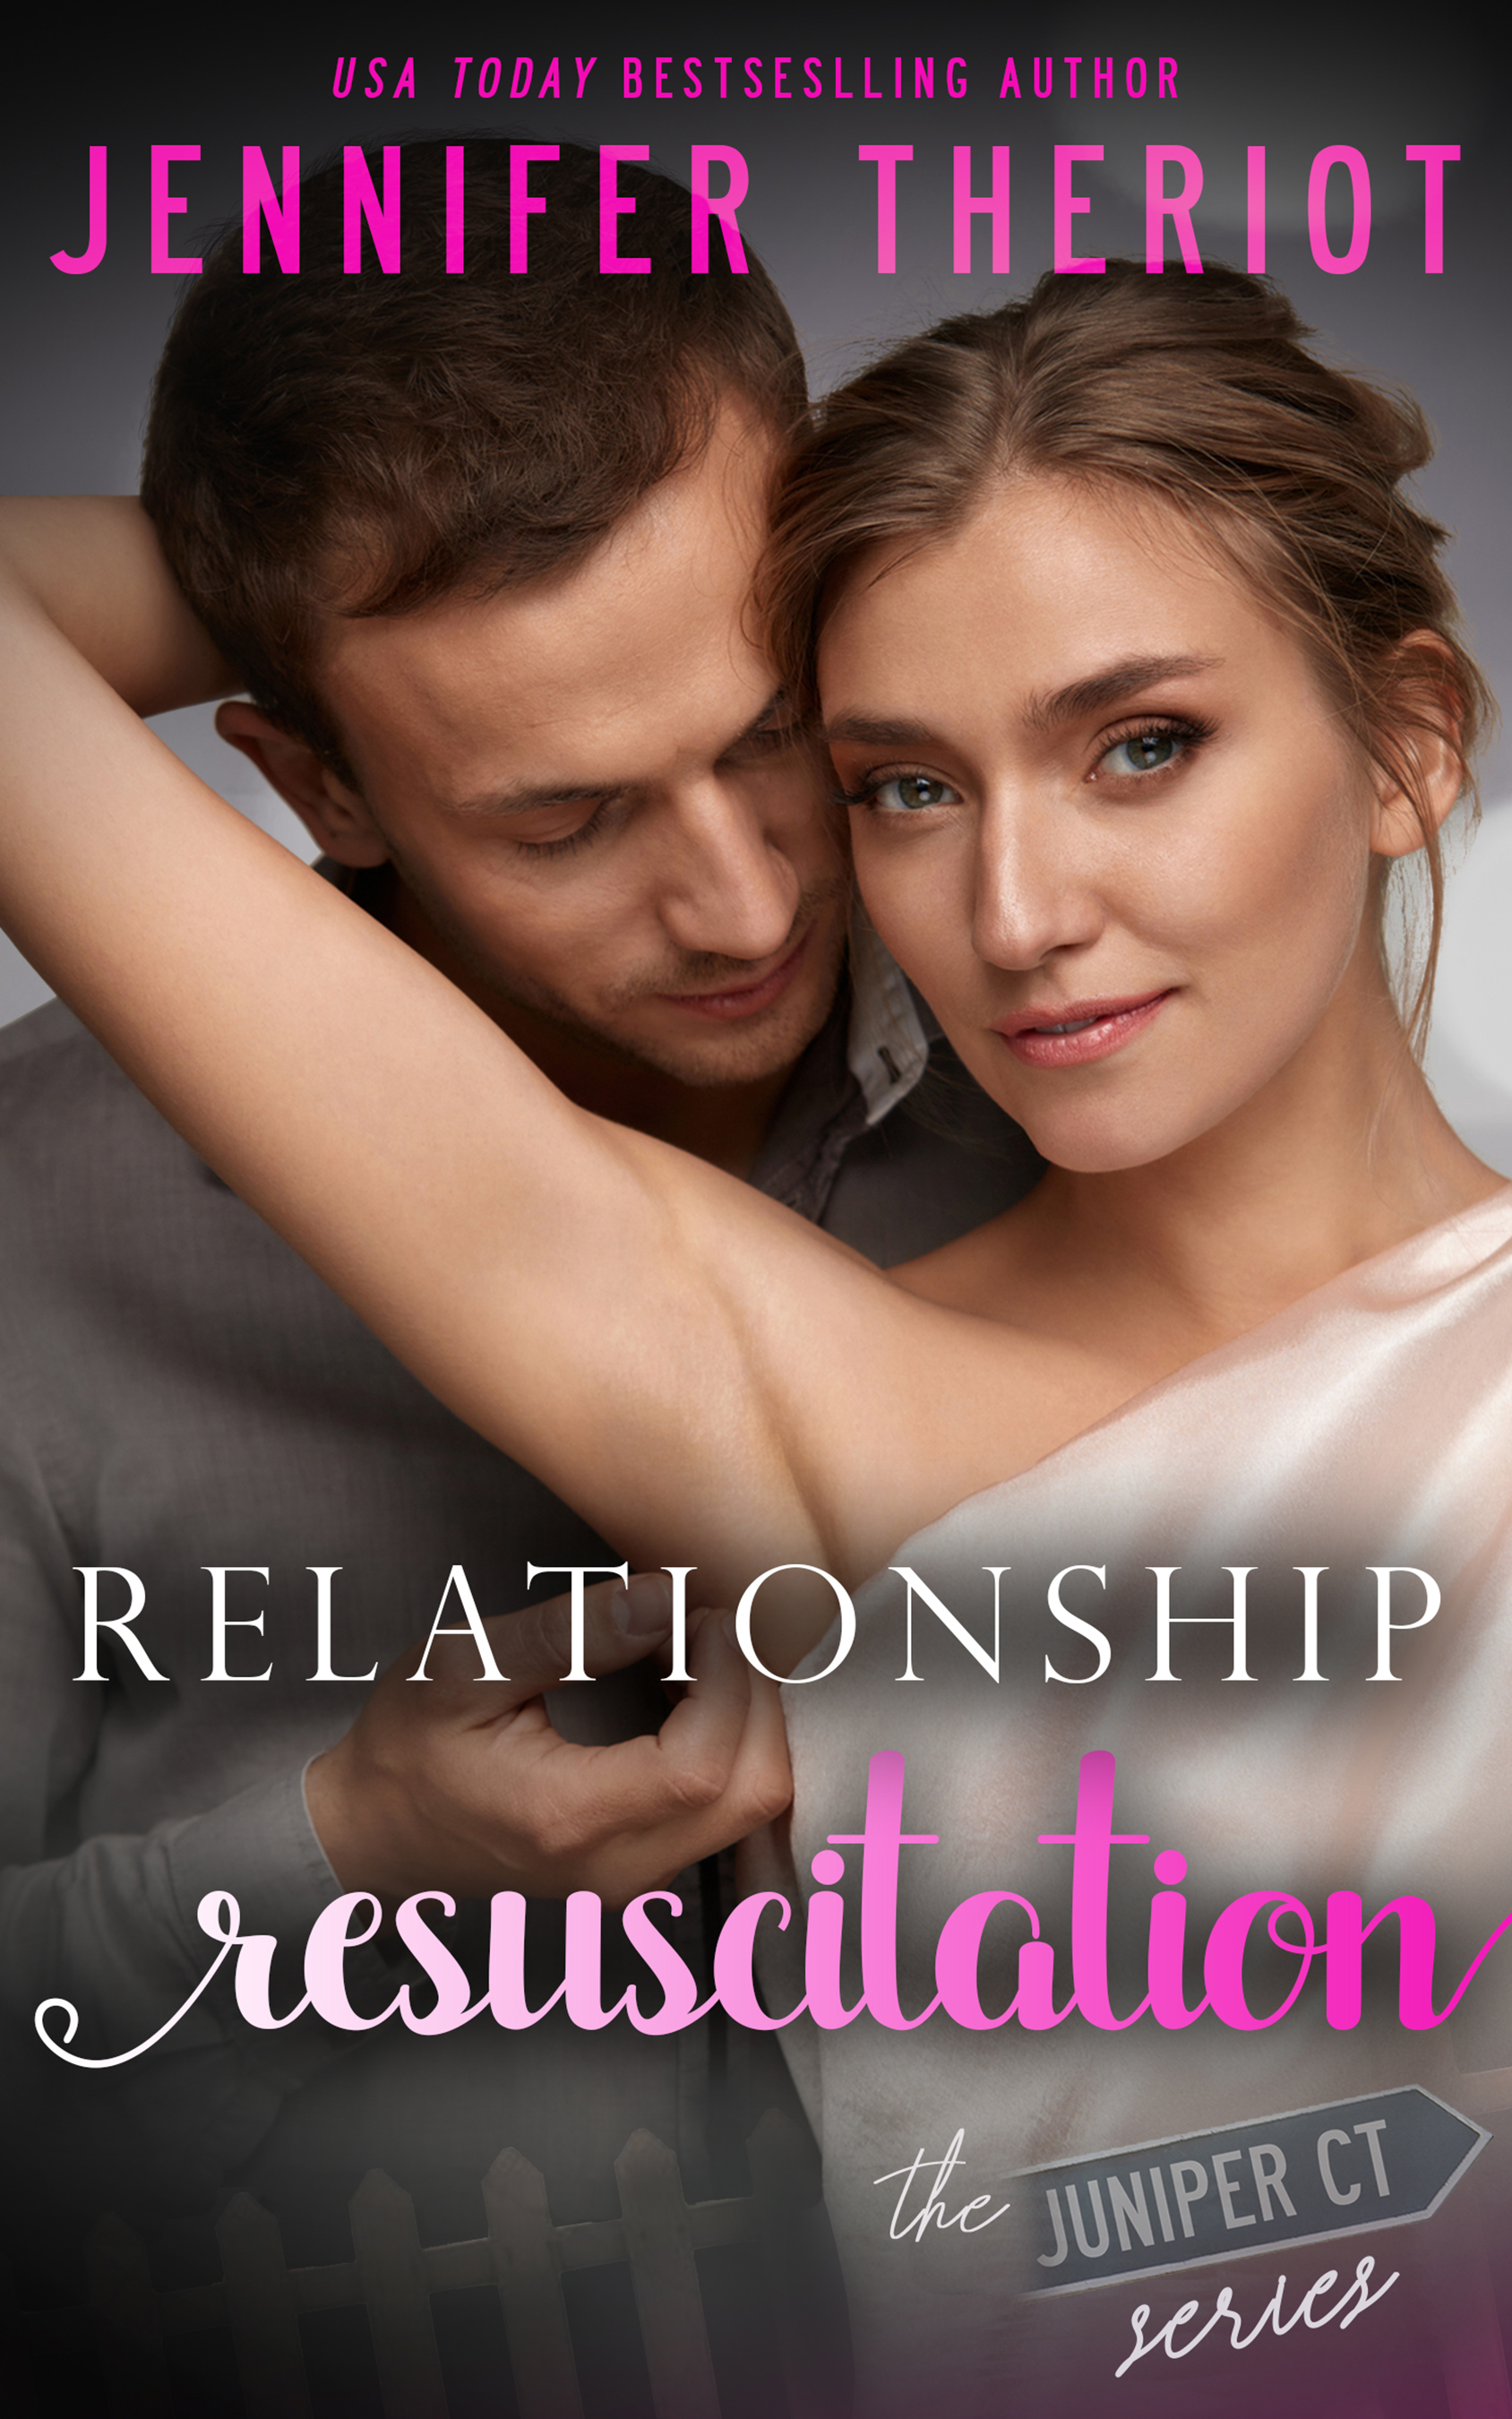 FREE: Relationship Resuscitation by Jennifer Theriot